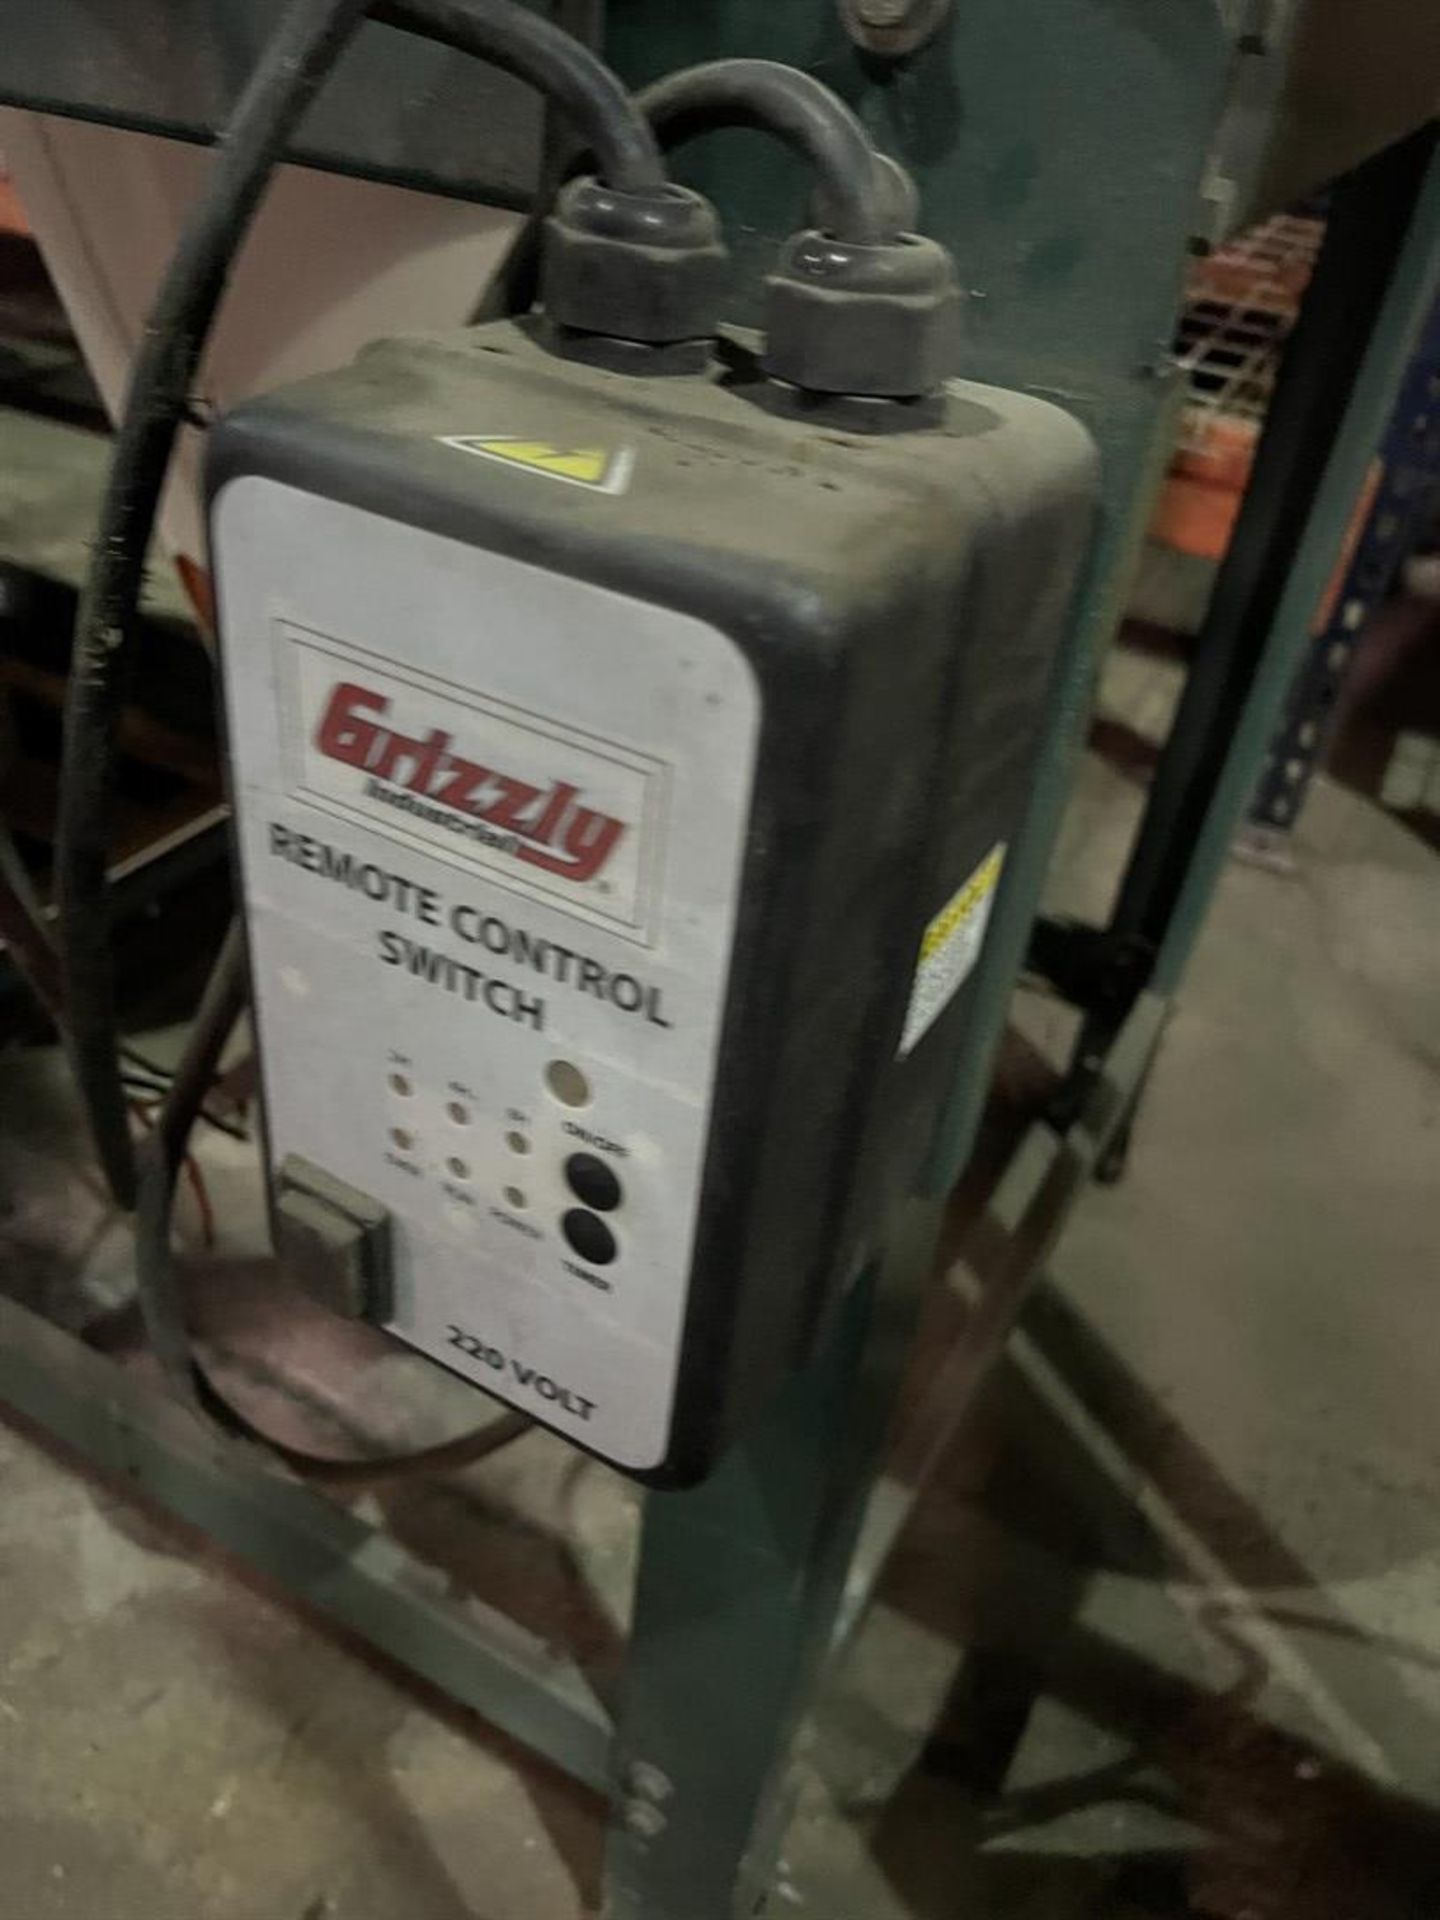 GRIZZLY G0601 5 HP Cyclone Dust Collector (Building 39) - Image 3 of 5